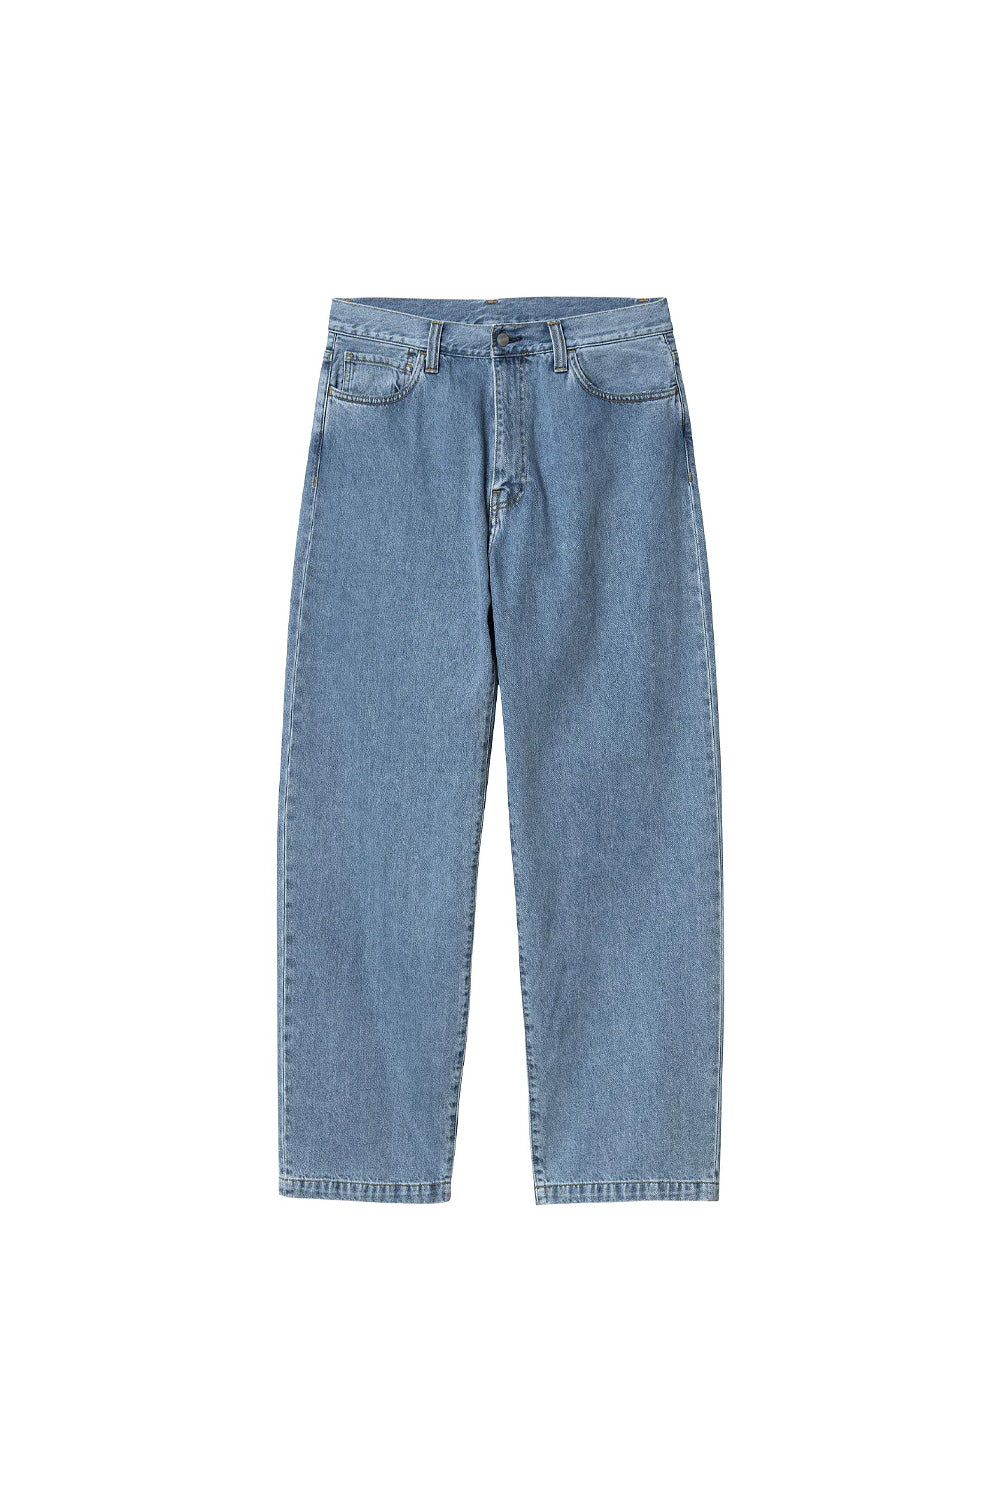 Carhartt WIP Landon Baggy Pant Blue (Heavy Stone Washed) - BONKERS